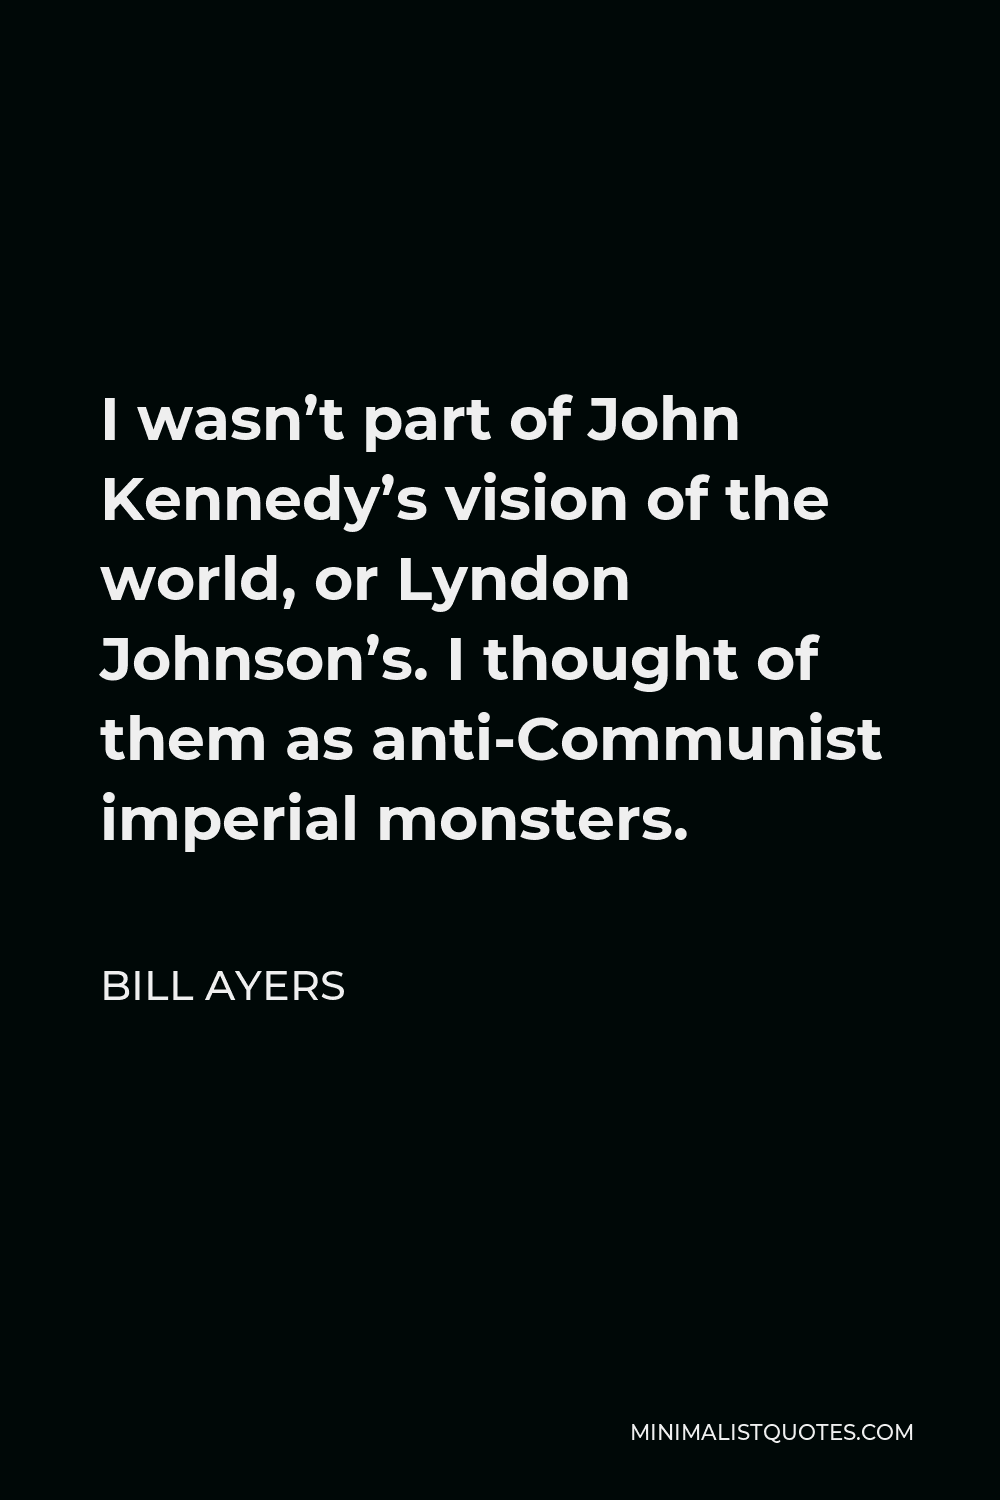 Bill Ayers Quote - I wasn’t part of John Kennedy’s vision of the world, or Lyndon Johnson’s. I thought of them as anti-Communist imperial monsters.